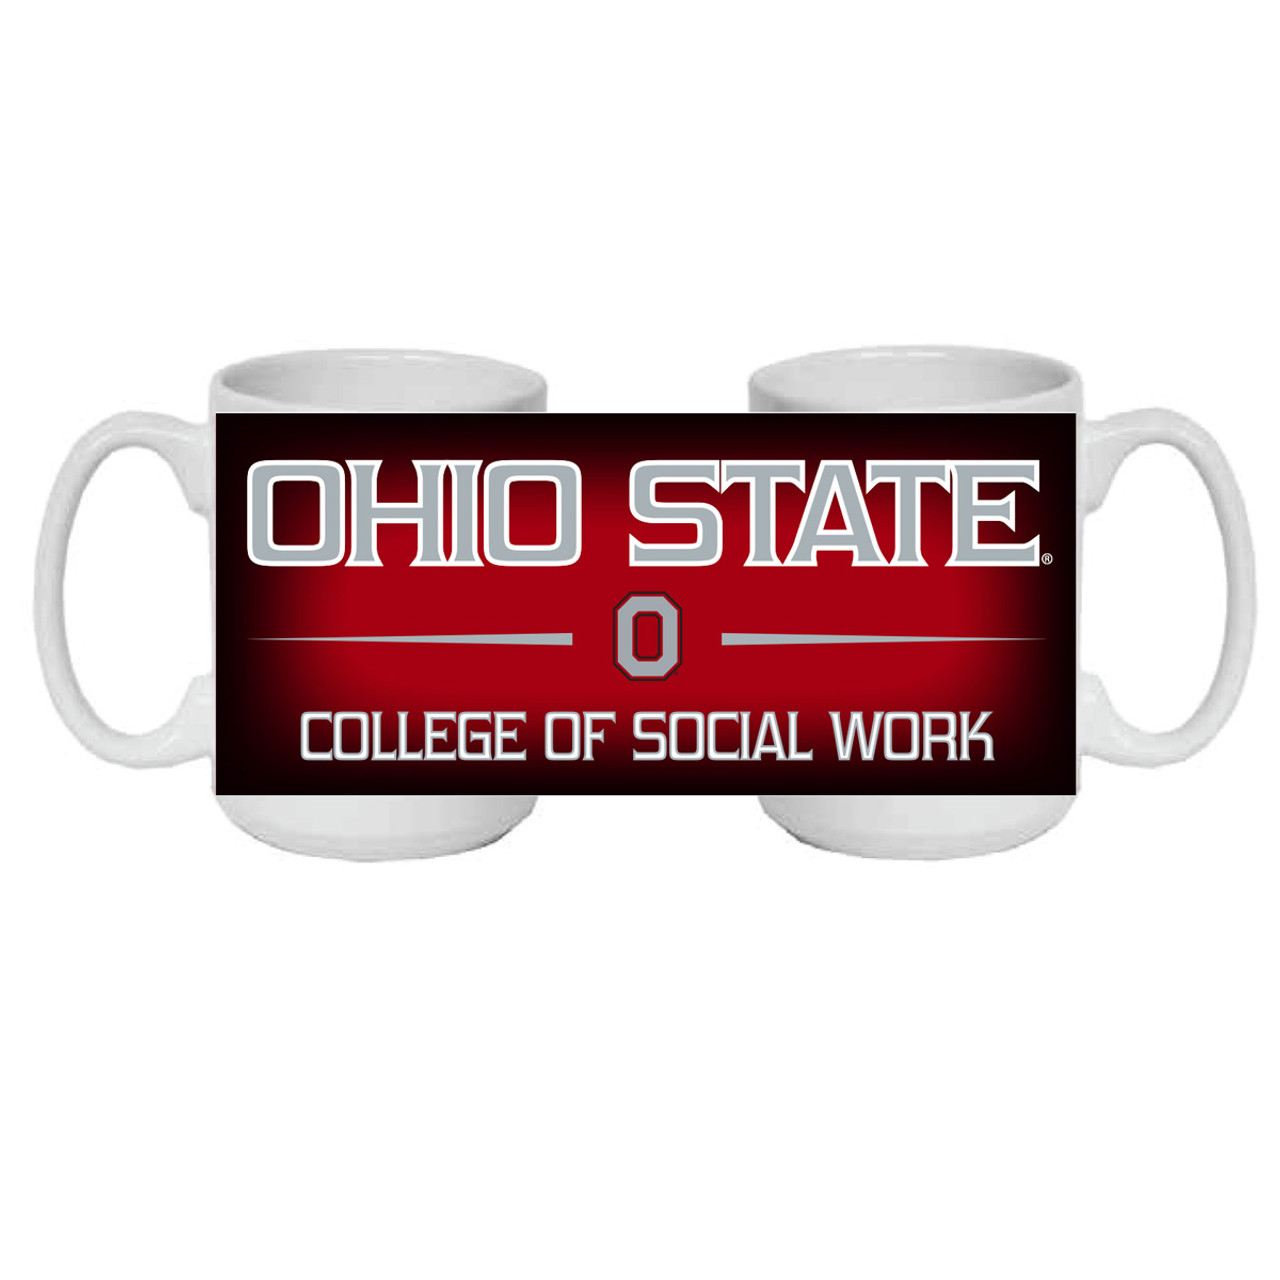 Ohio State College of Social Work Mug - College Traditions